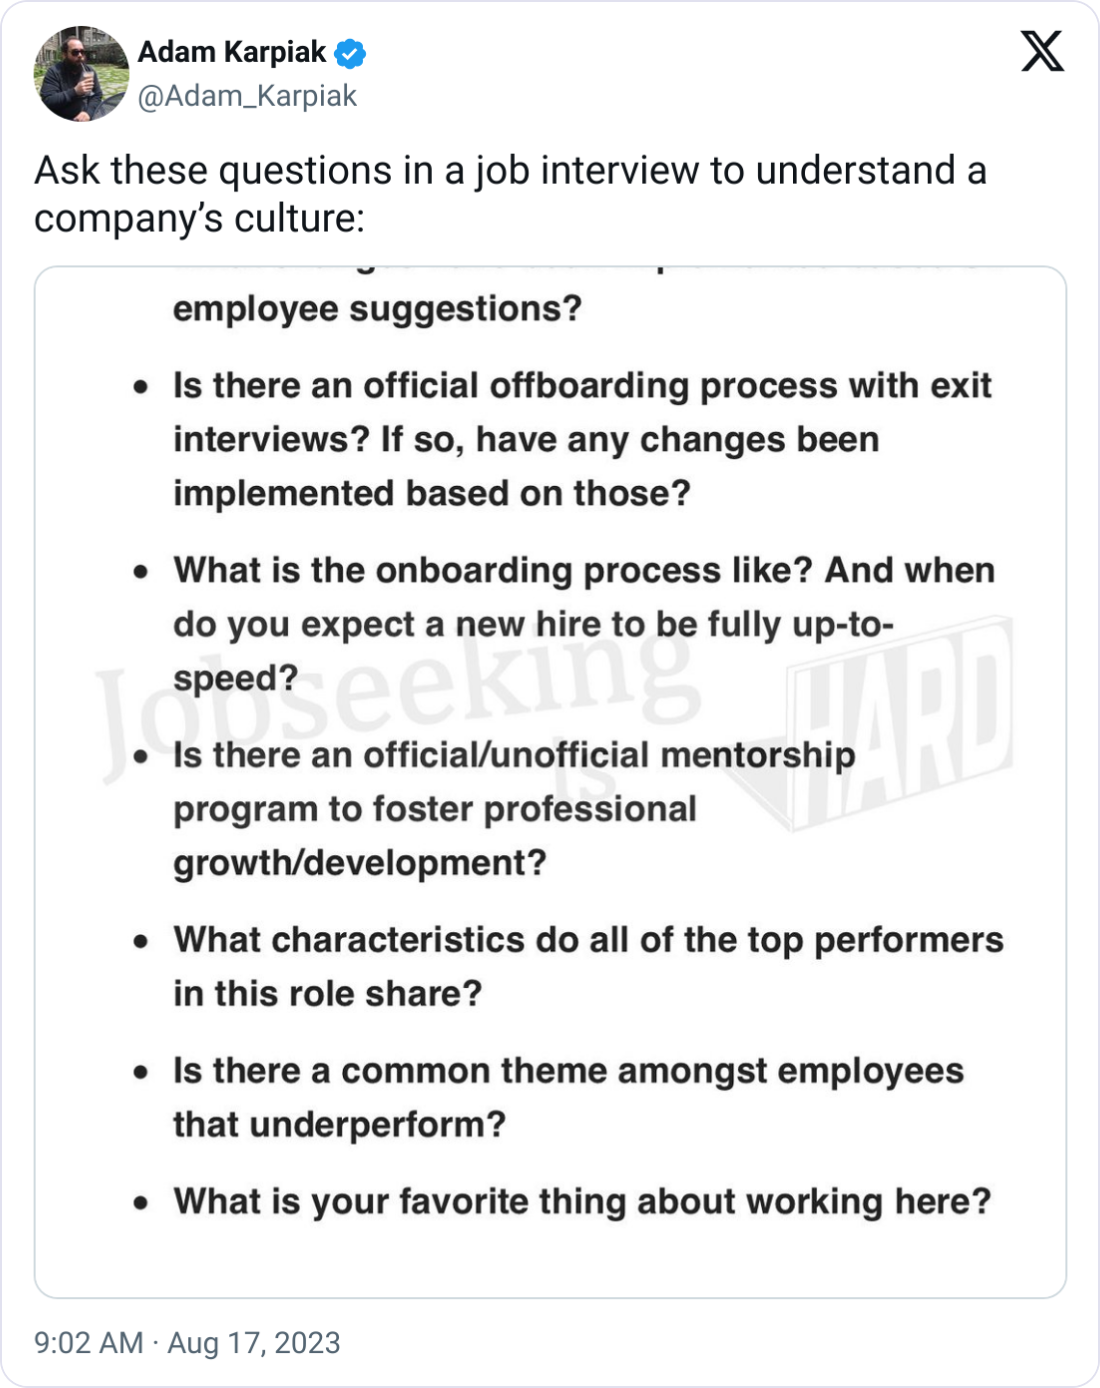 Adam Karpiak @Adam_Karpiak Ask these questions in a job interview to understand a company’s culture: My top interview questions:  What changes have been implemented based on employee suggestions?  Is there an official offboarding process with exit interviews? If so, have any changes been implemented based on those?  What is the onboarding process like? And when do you expect a new hire to be fully up-to-speed?  Is there an official/unofficial mentorship program to foster professional growth/development?  What characteristics do all of the top performers in this role share?  Is there a common theme amongst employees that underperform?  What is your favorite thing about working here?